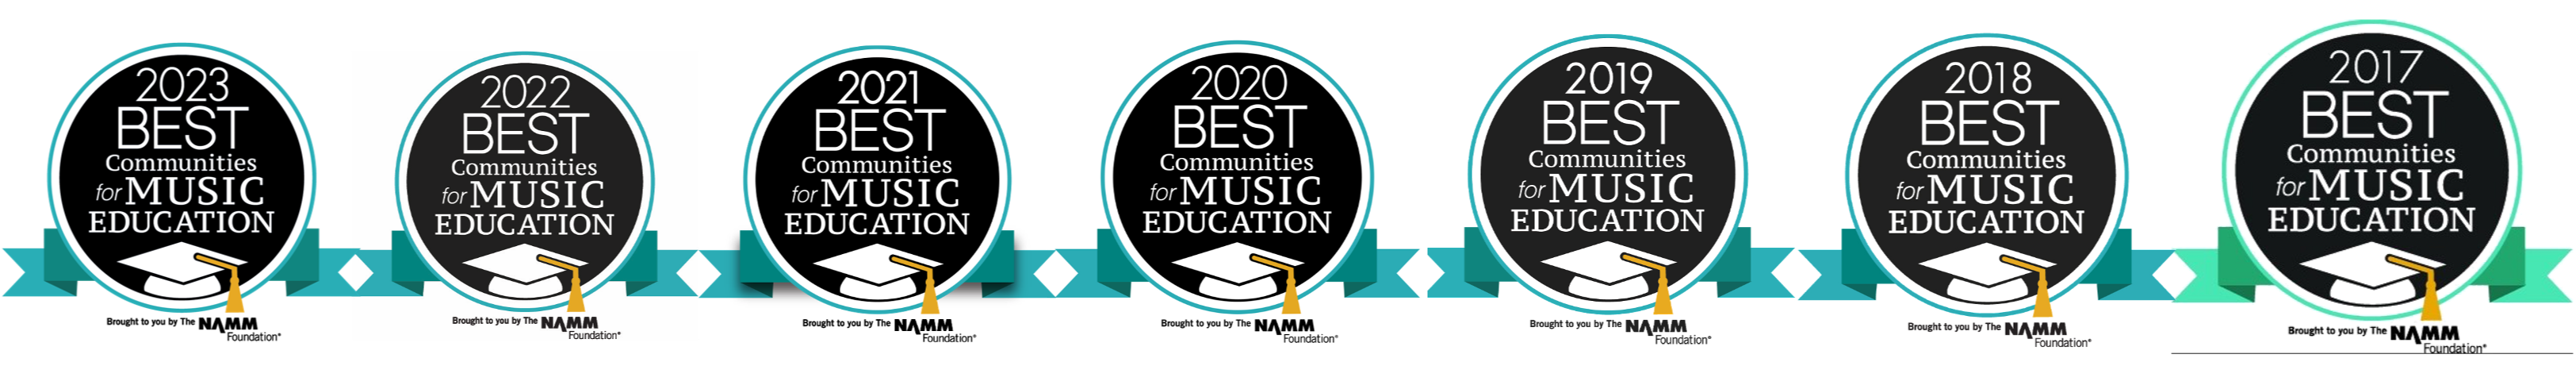 Best communities for Music Education 2017, 2018, 2019, 2020, and 2021